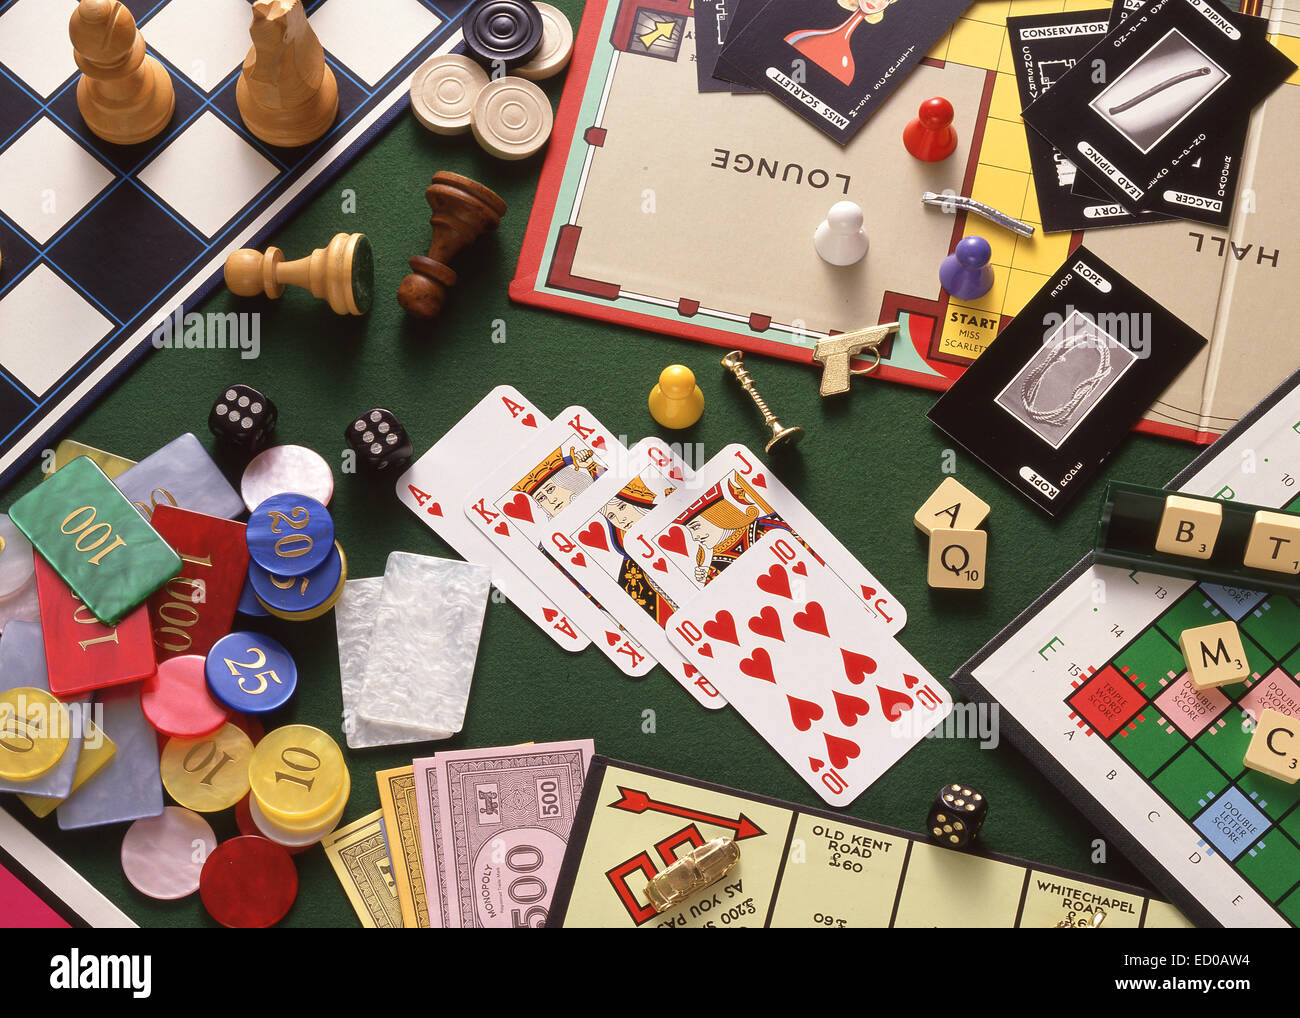 Still-life selection of board games (Monopoly, Chess, Cluedo, Scrabble) with playing cards and gambling chips Stock Photo